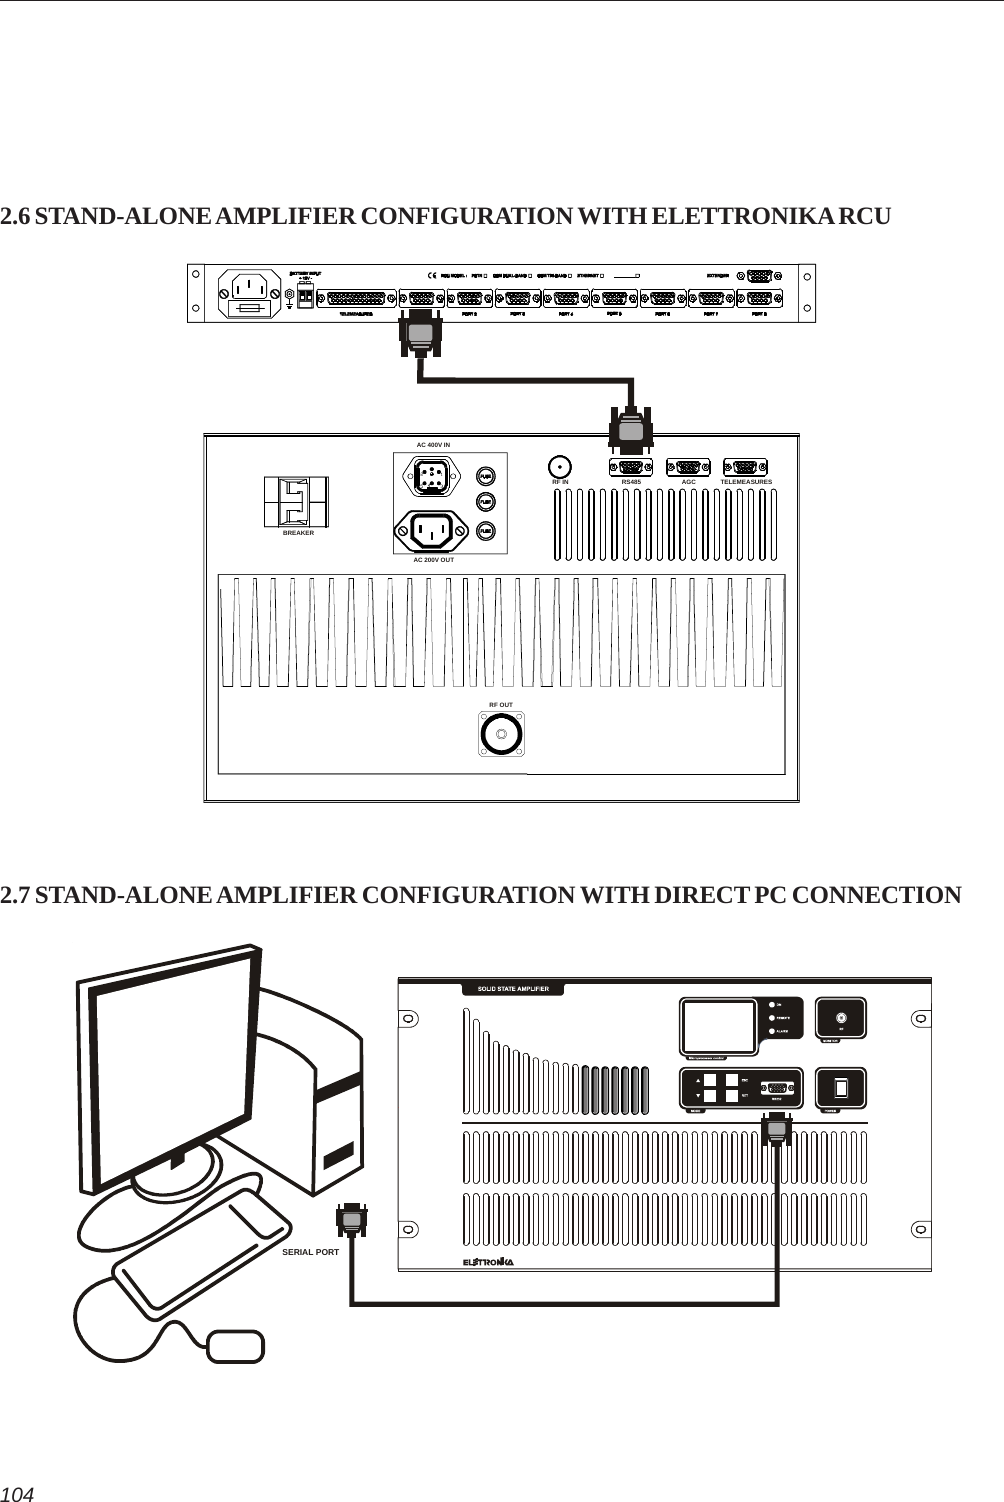 1042.7 STAND-ALONE AMPLIFIER CONFIGURATION WITH DIRECT PC CONNECTION2.6 STAND-ALONE AMPLIFIER CONFIGURATION WITH ELETTRONIKA RCUSERIAL PORTBREAKERAC 200V OUTAC 400V INRF OUTAGCRS485 TELEMEASURESRF IN